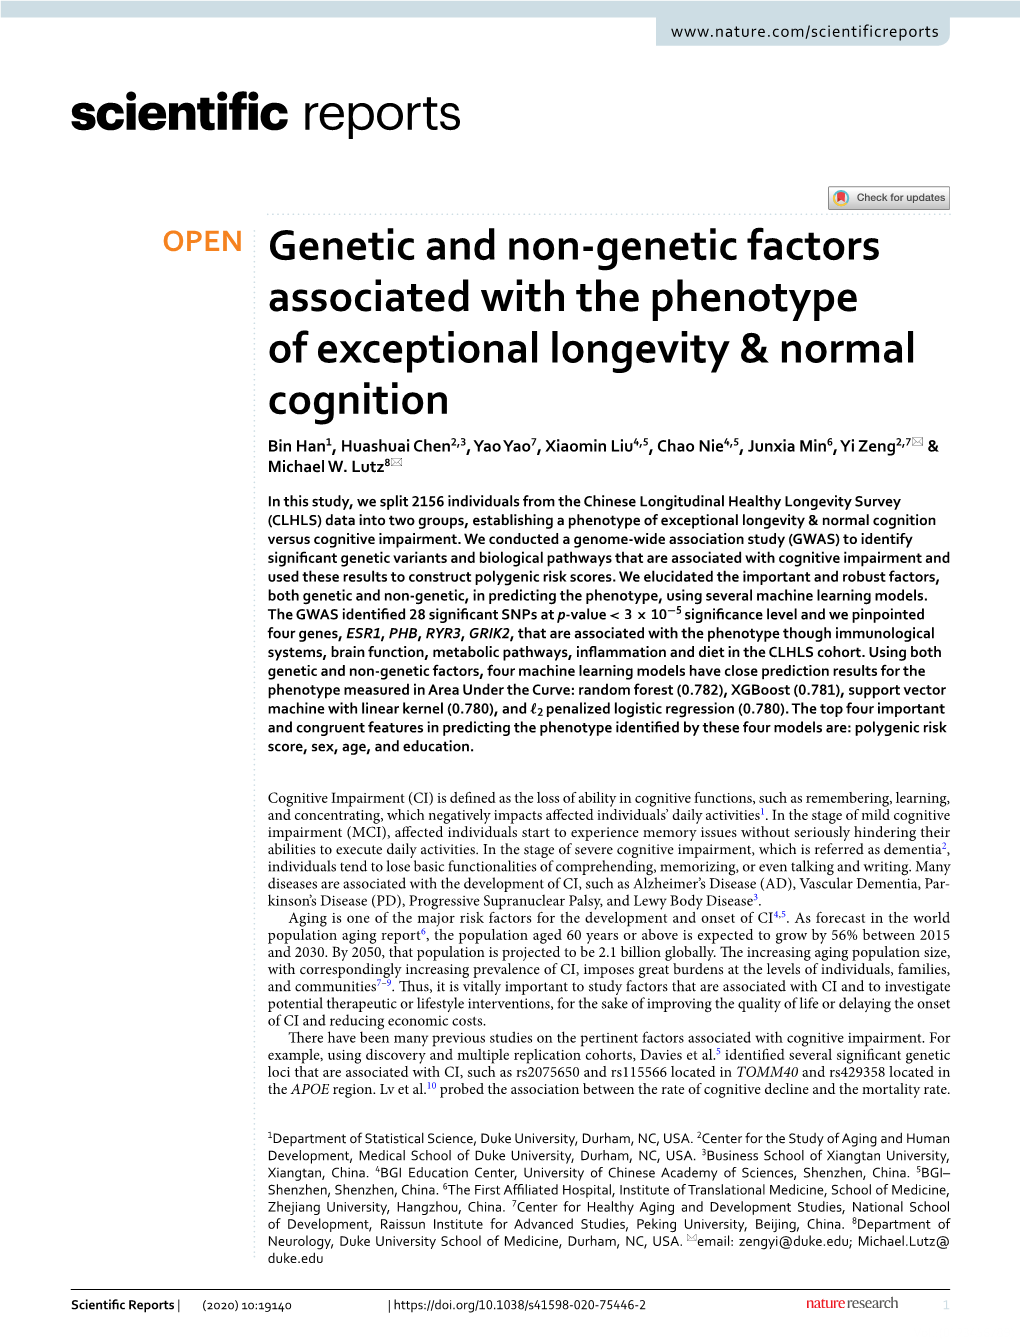 Genetic and Non-Genetic Factors Associated with the Phenotype Of